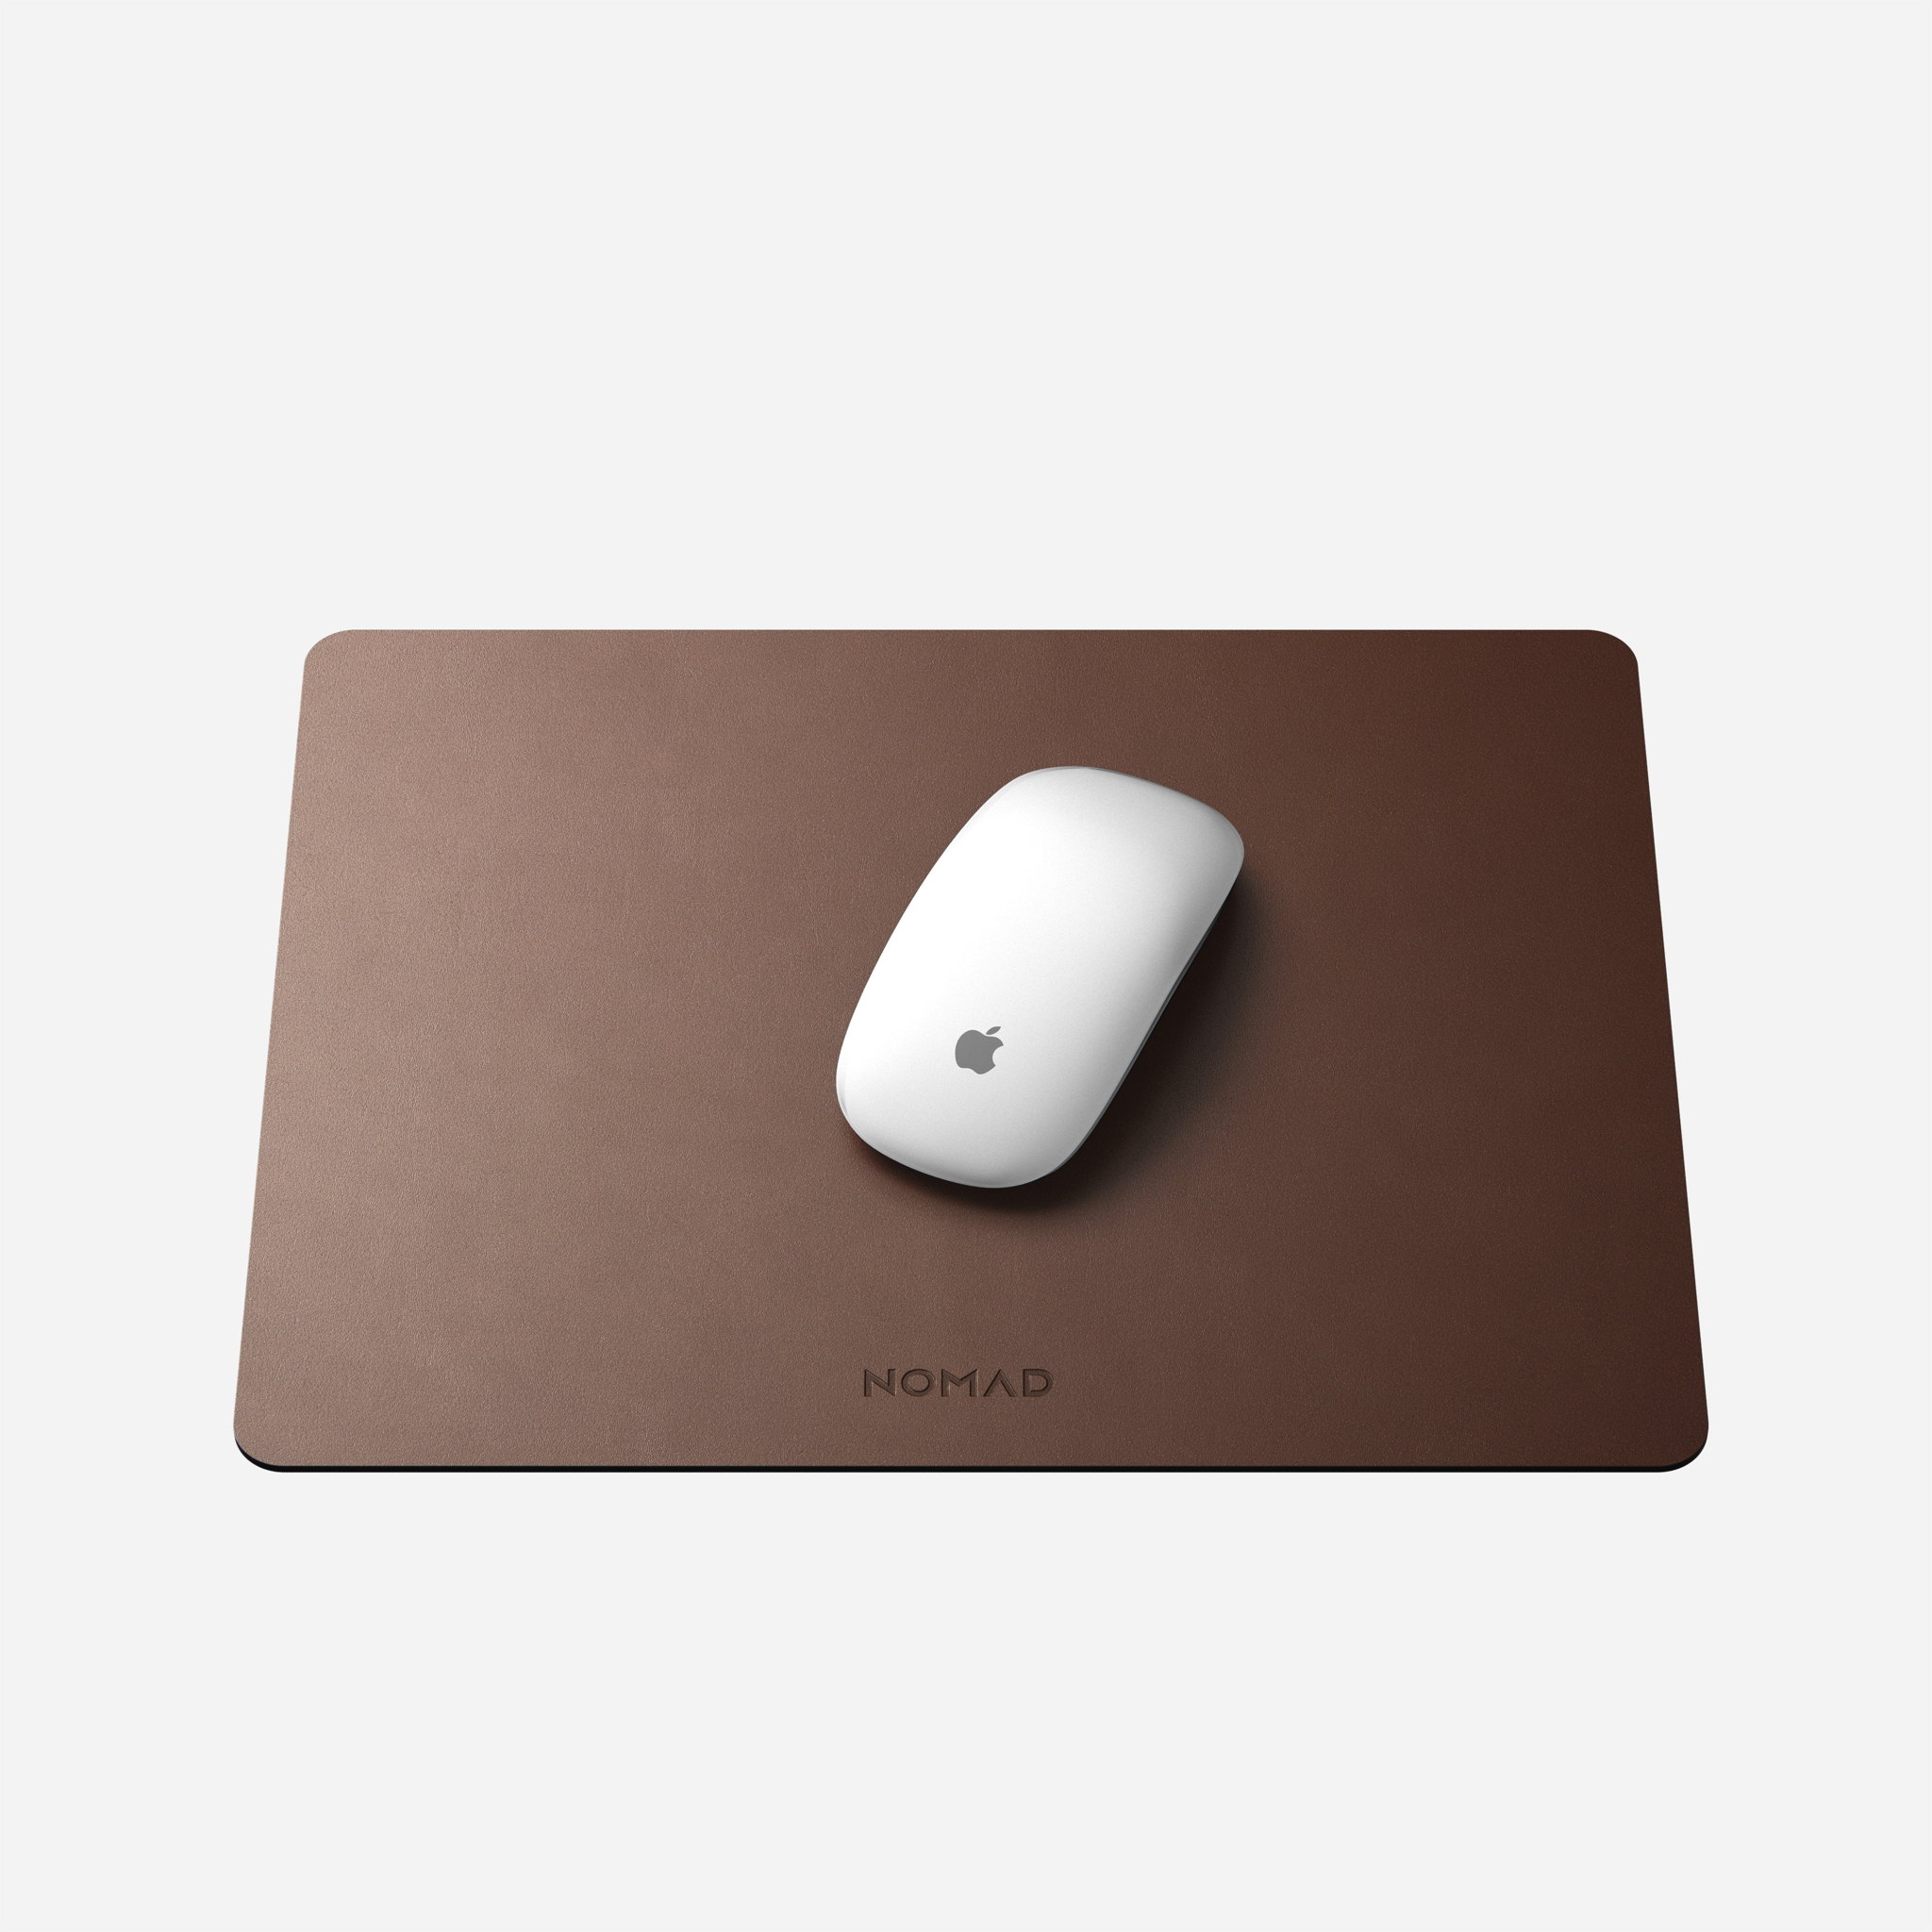 Double Layer Leather Mouse Pad Real Leather and Suede Green Mousepad with Yellow Vegetable Tan Wrist rest